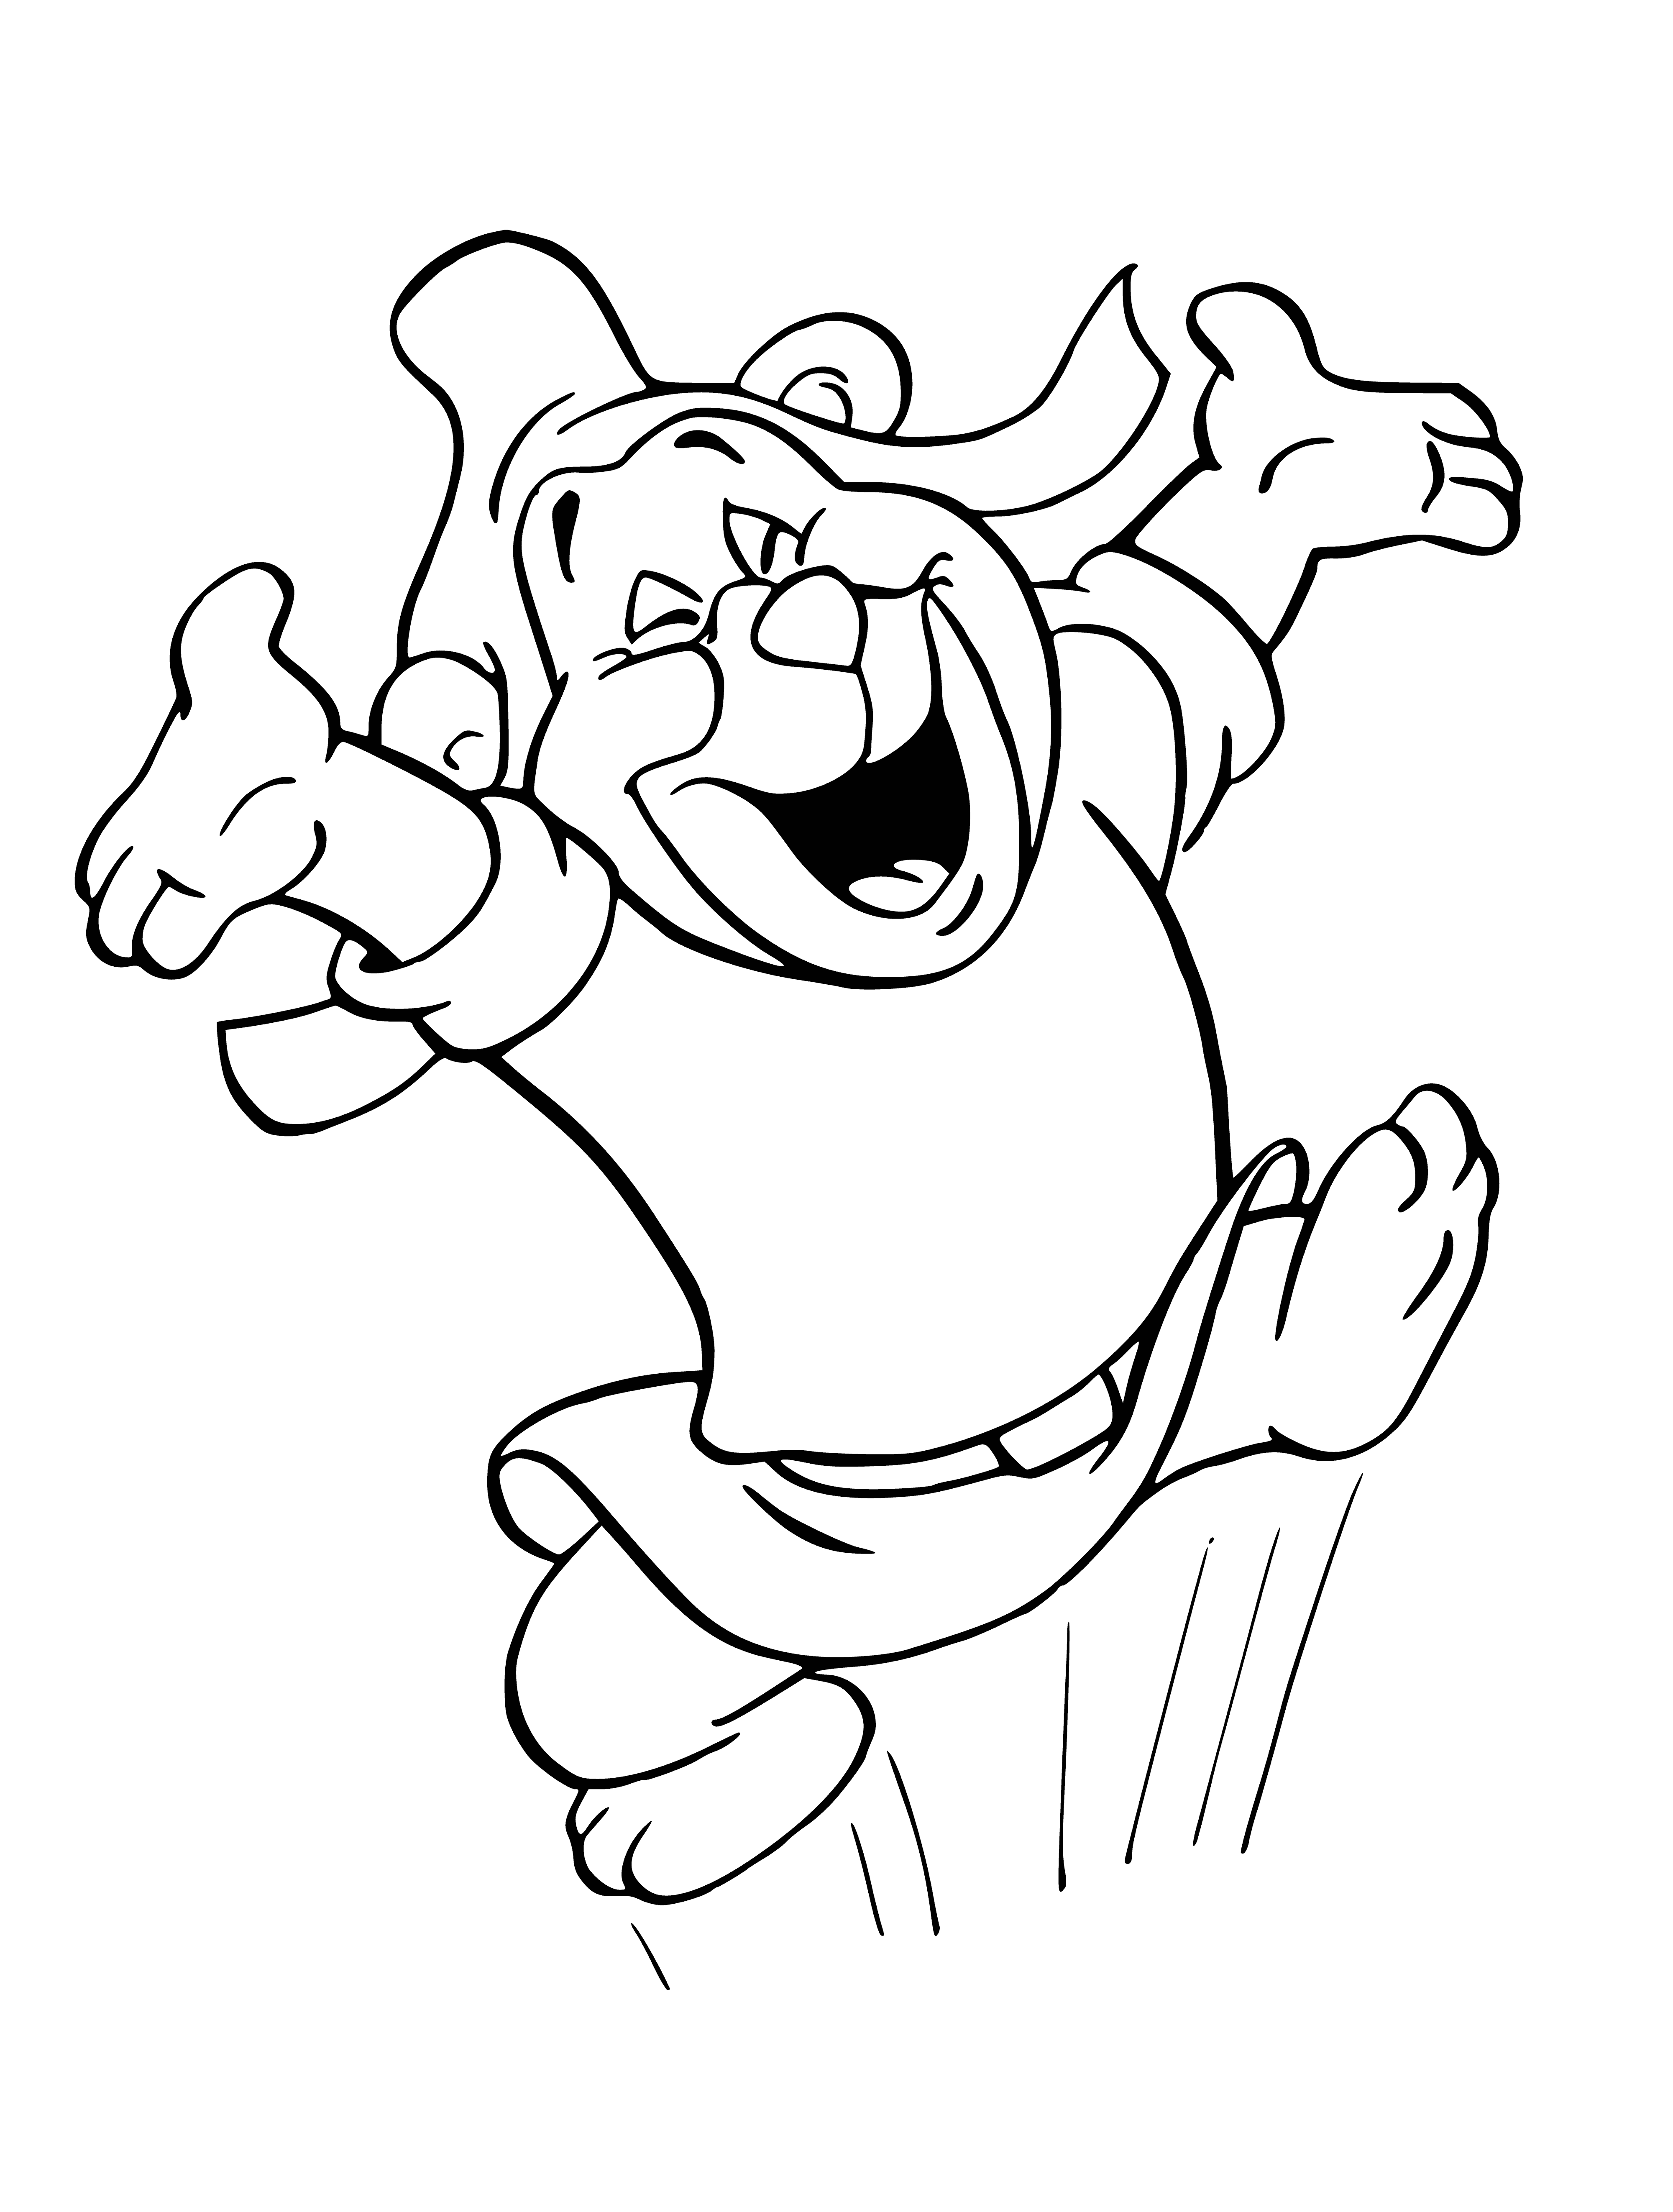 coloring page: Eight gummy bears of different colors are sitting on a white plate with arms crossed: four yellow, two green, one blue, and one red.